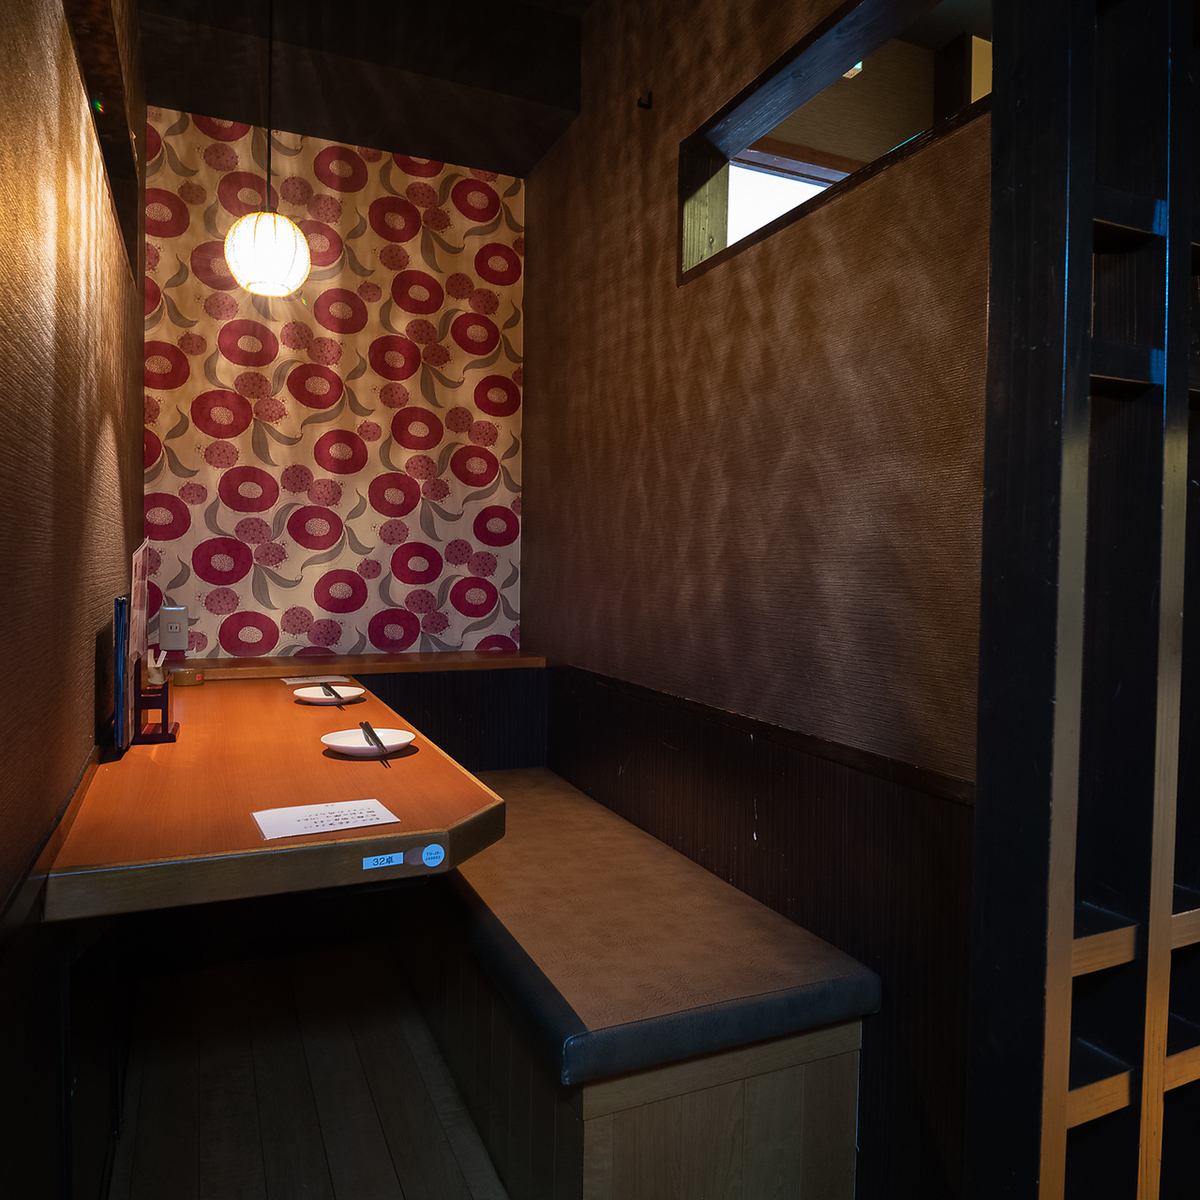 We have completely private rooms, so everyone can enjoy themselves together♪